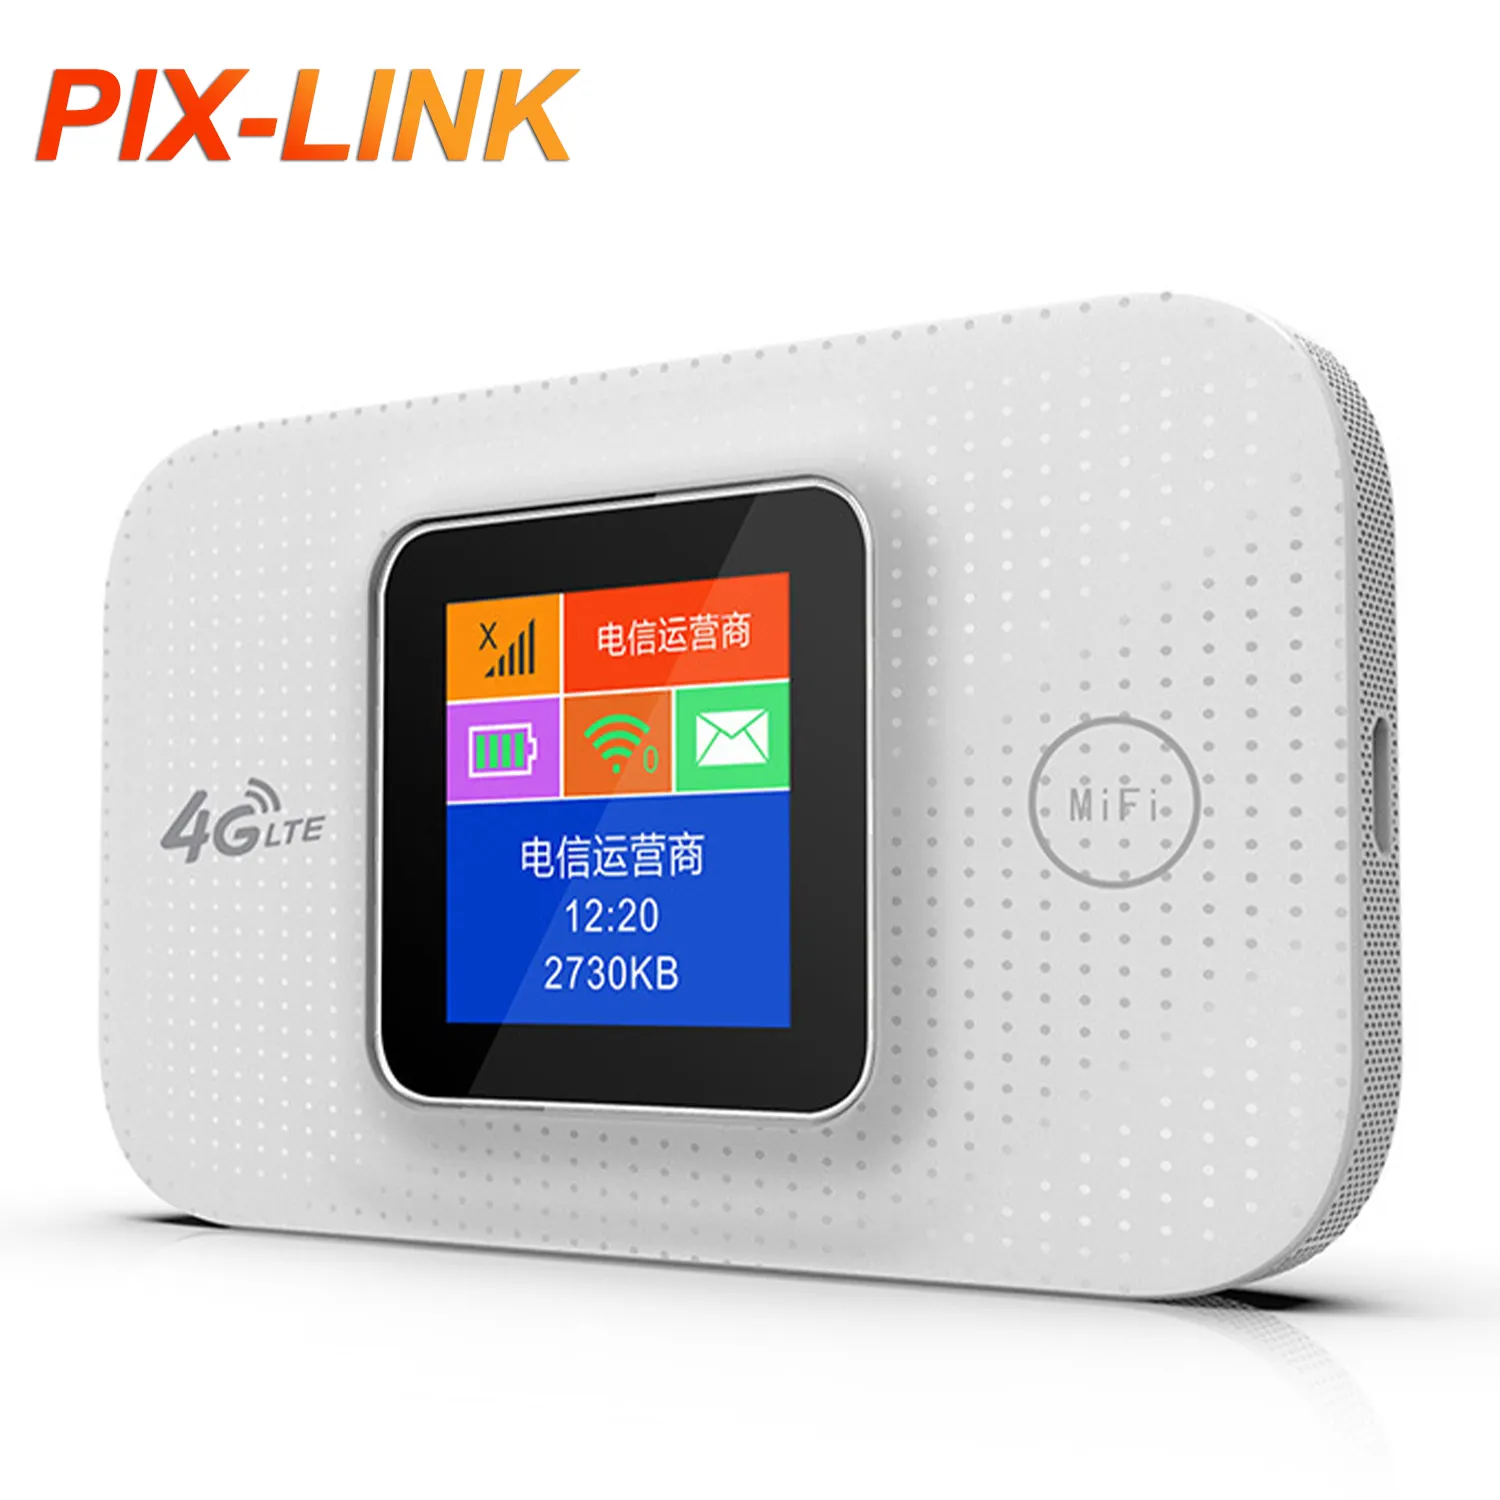 PIX-LINK 300mbps Wireless Pocket Wifi Router Mobile Hotspot Router 3g 4g Lte Wifi Router 15 OEM ODM 1 SIM Card Support Voip Single Item